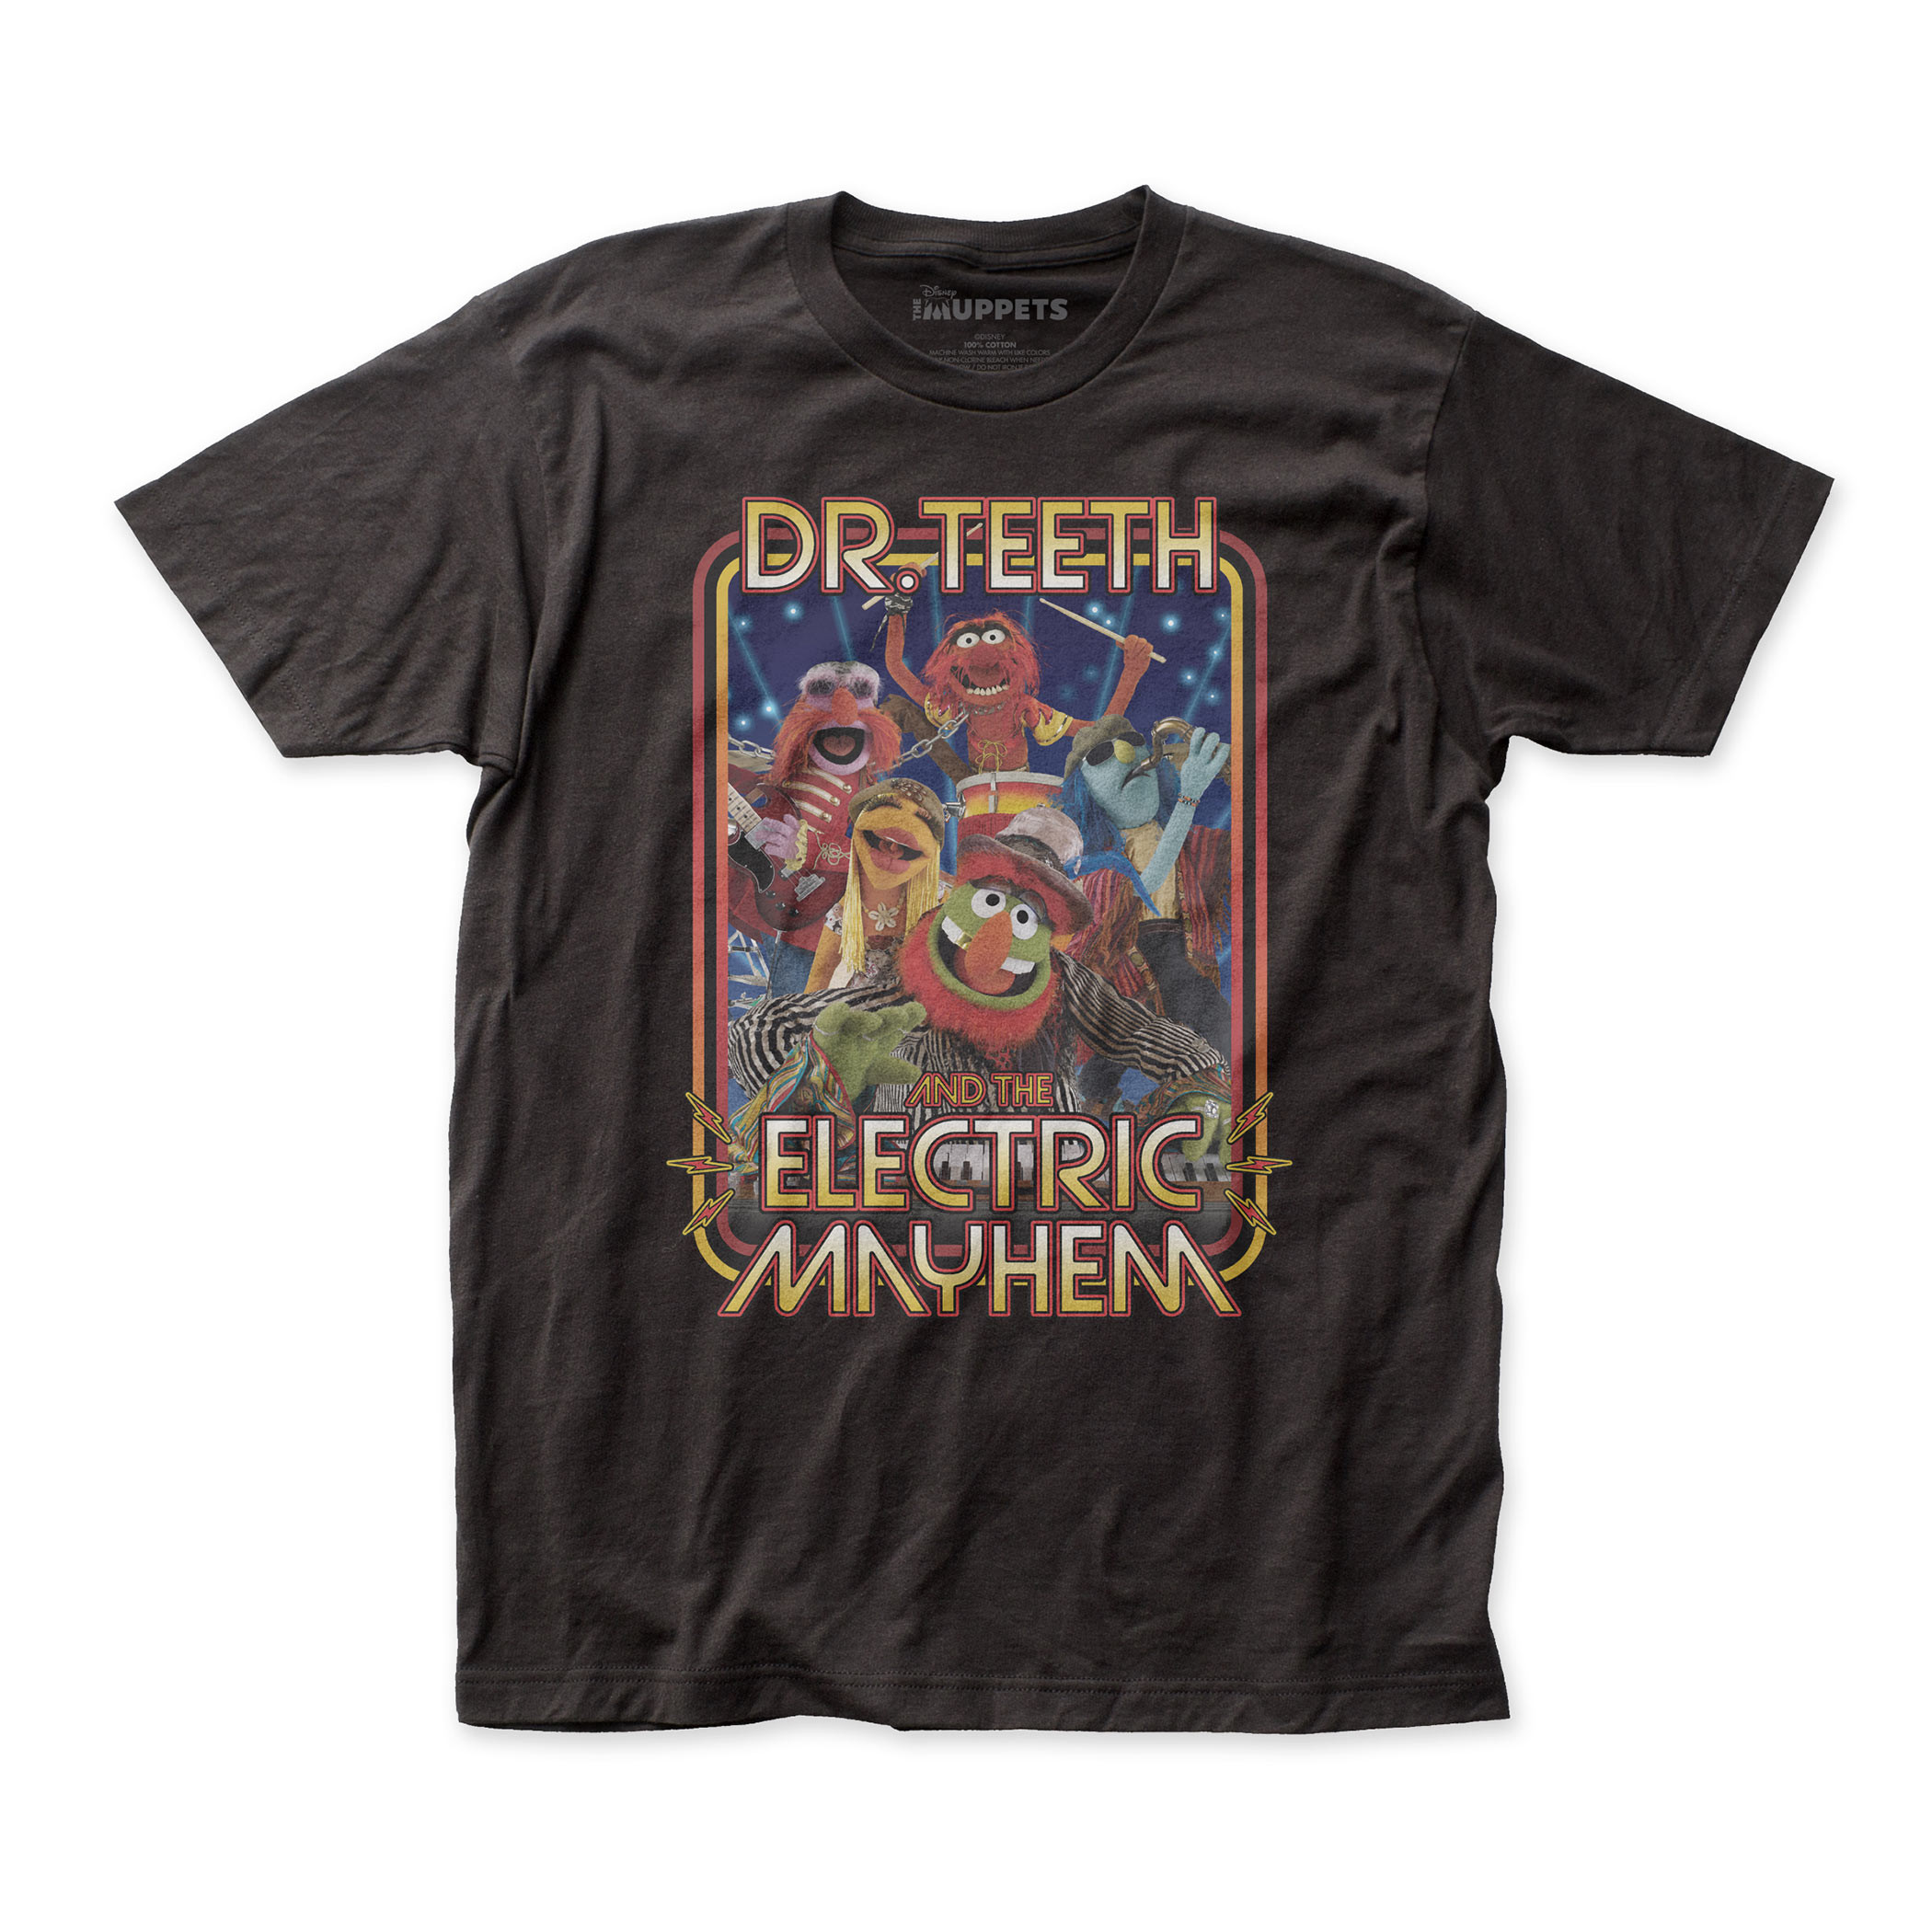 The Muppets Dr. Teeth And Band Men’s Black T-Shirt